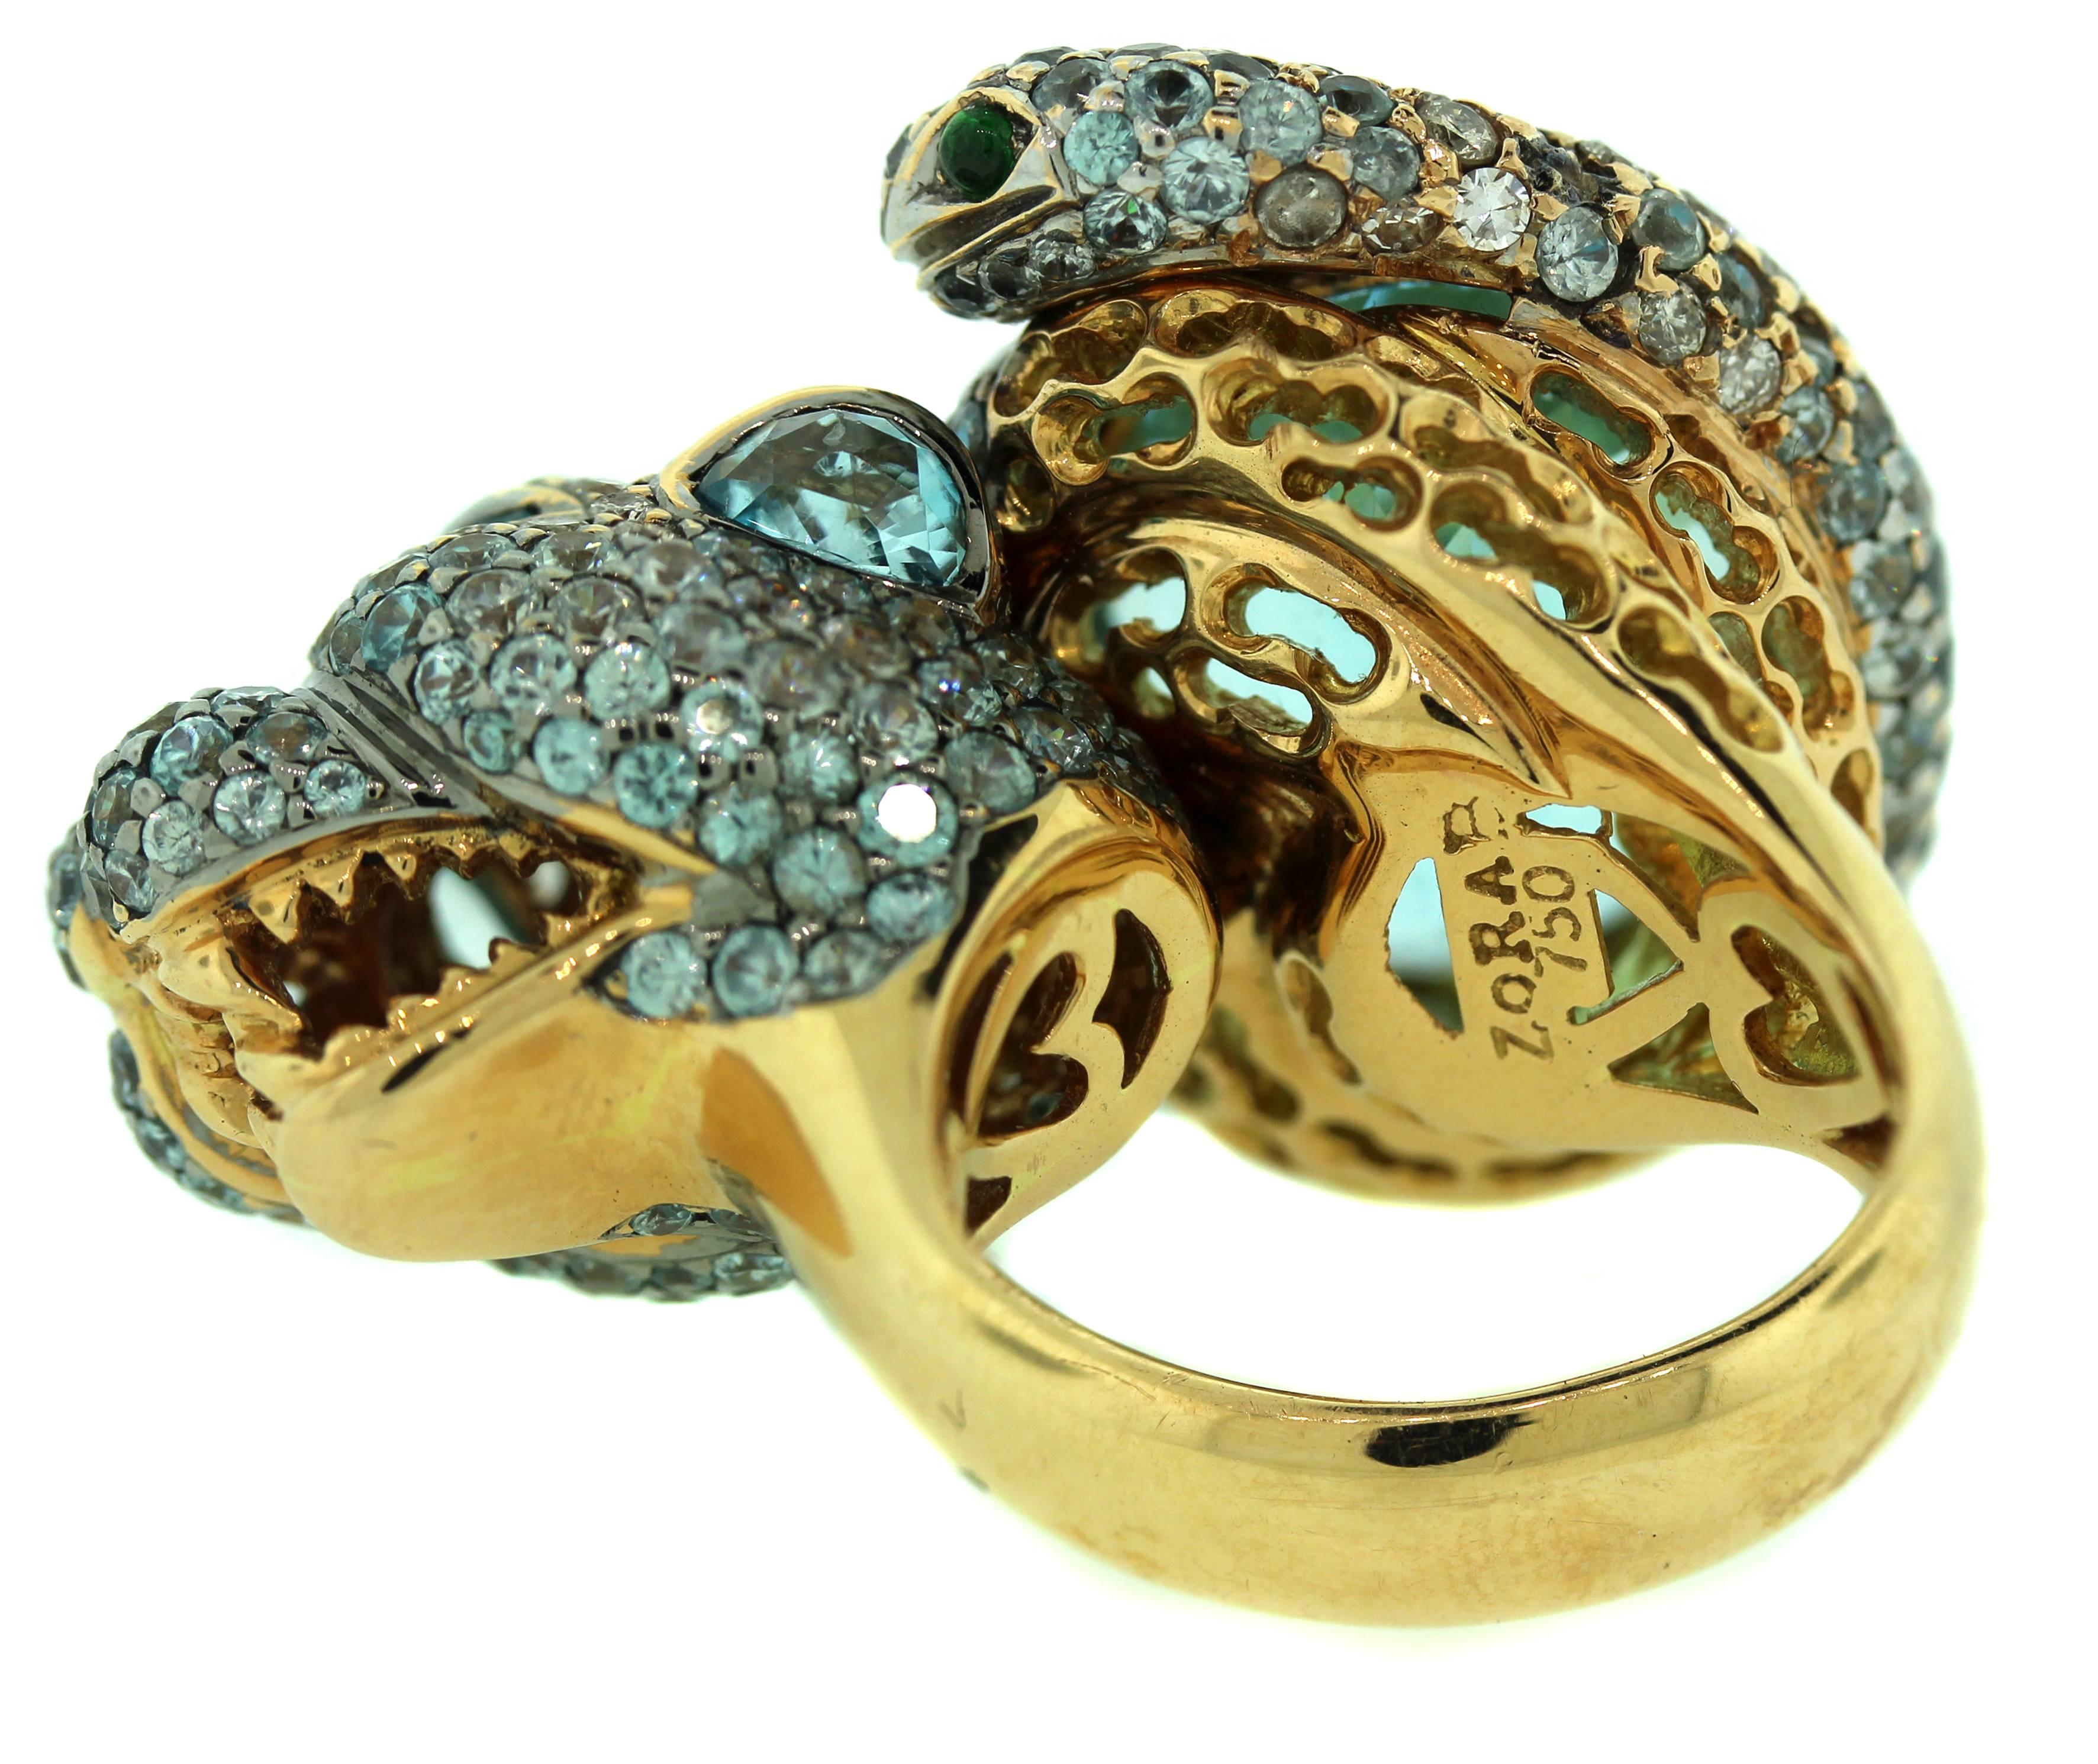 Zorab Aqumarine Shaded Sapphire Diamond Tiger 18K Yellow Gold Ring In Excellent Condition For Sale In Boca Raton, FL